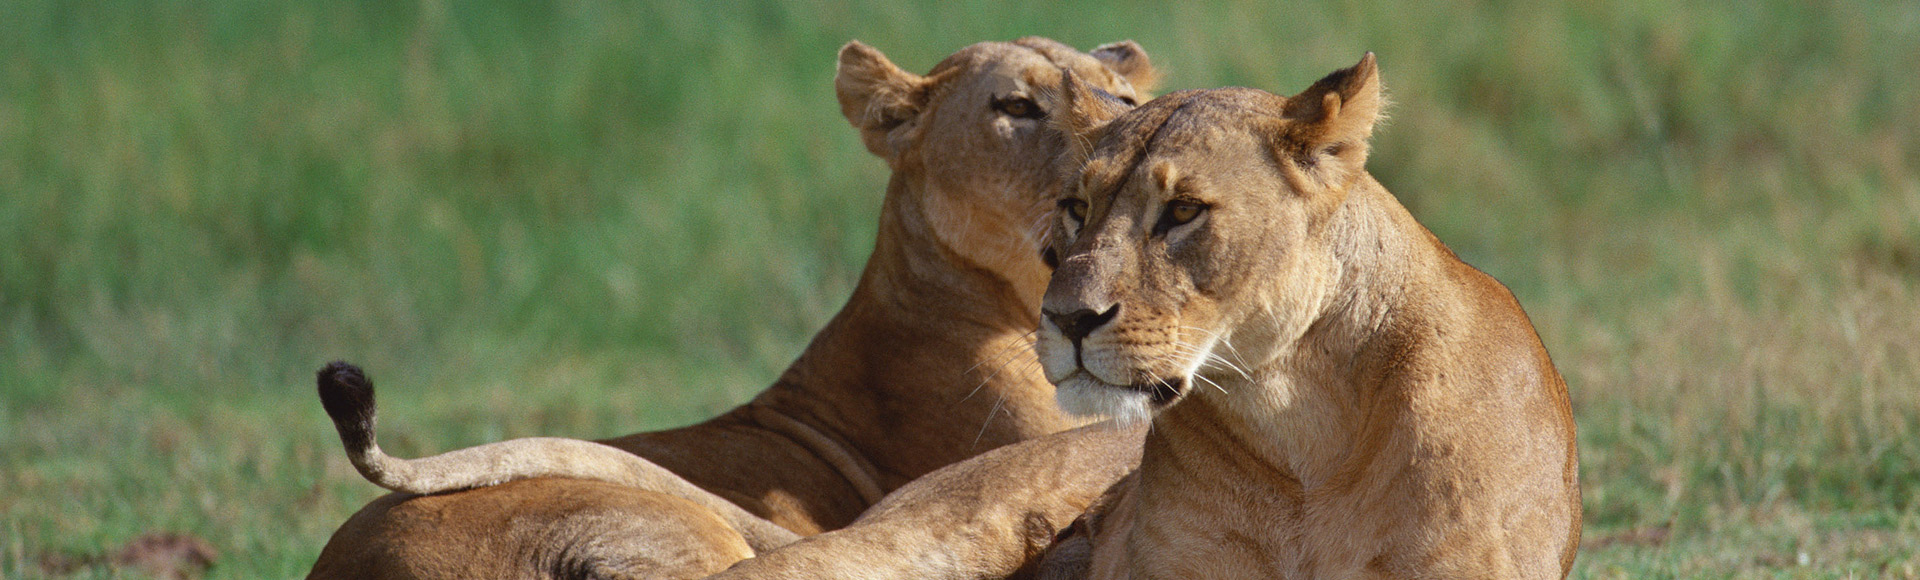 Lions in Ruaha National Park